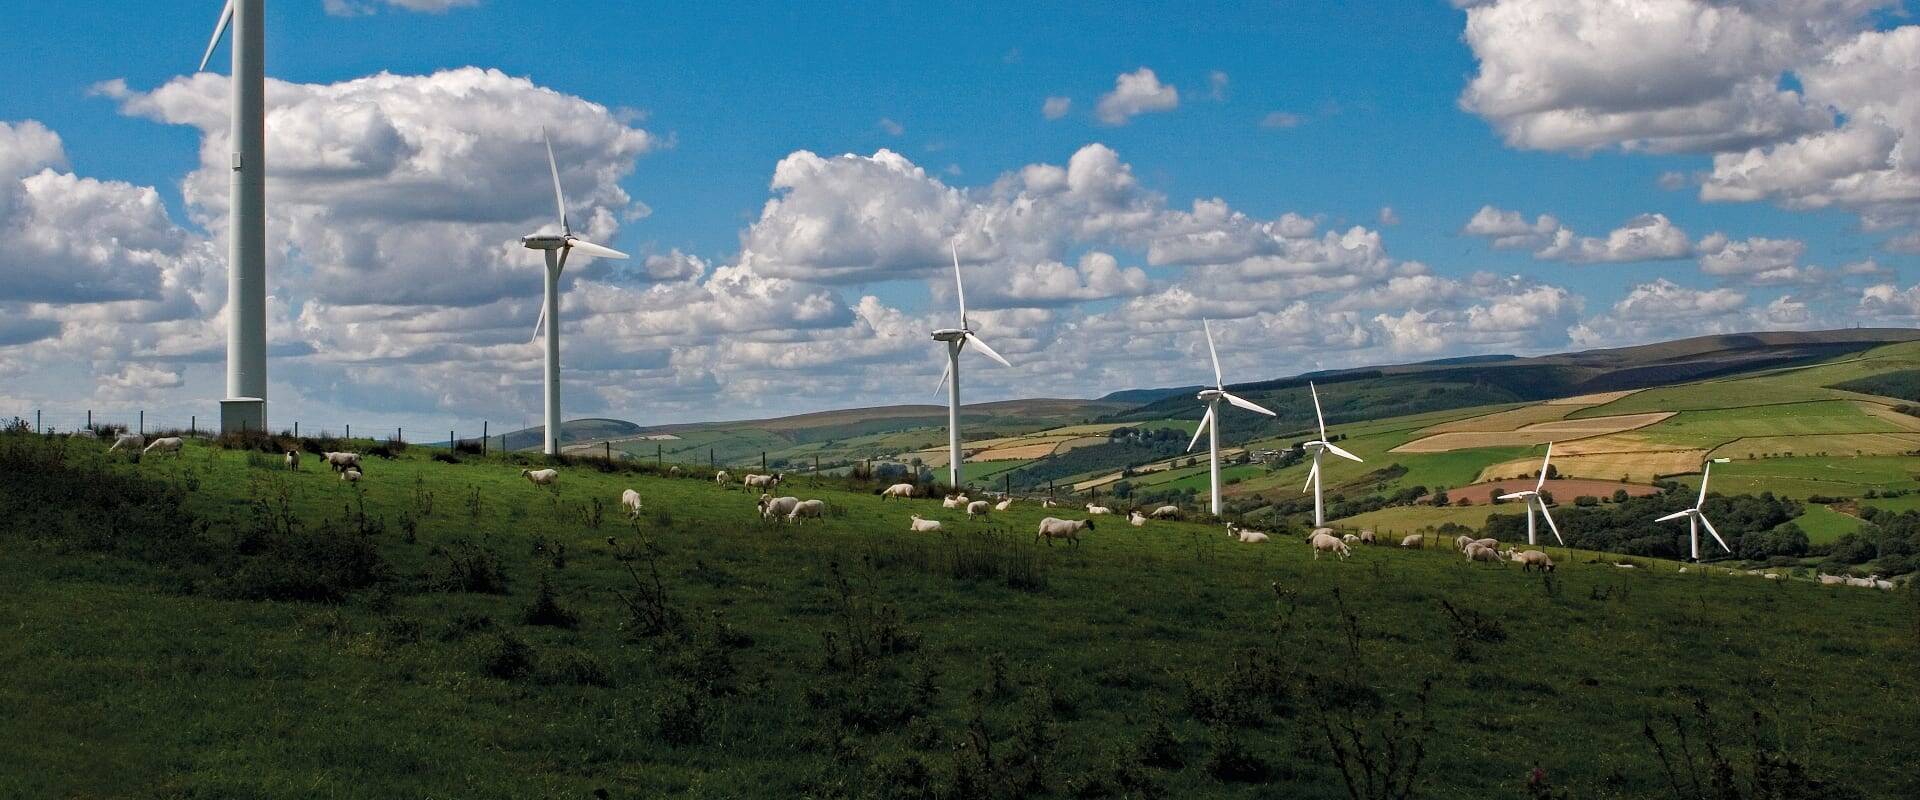 Renewables forecast to overtake fossil fuels in 2020